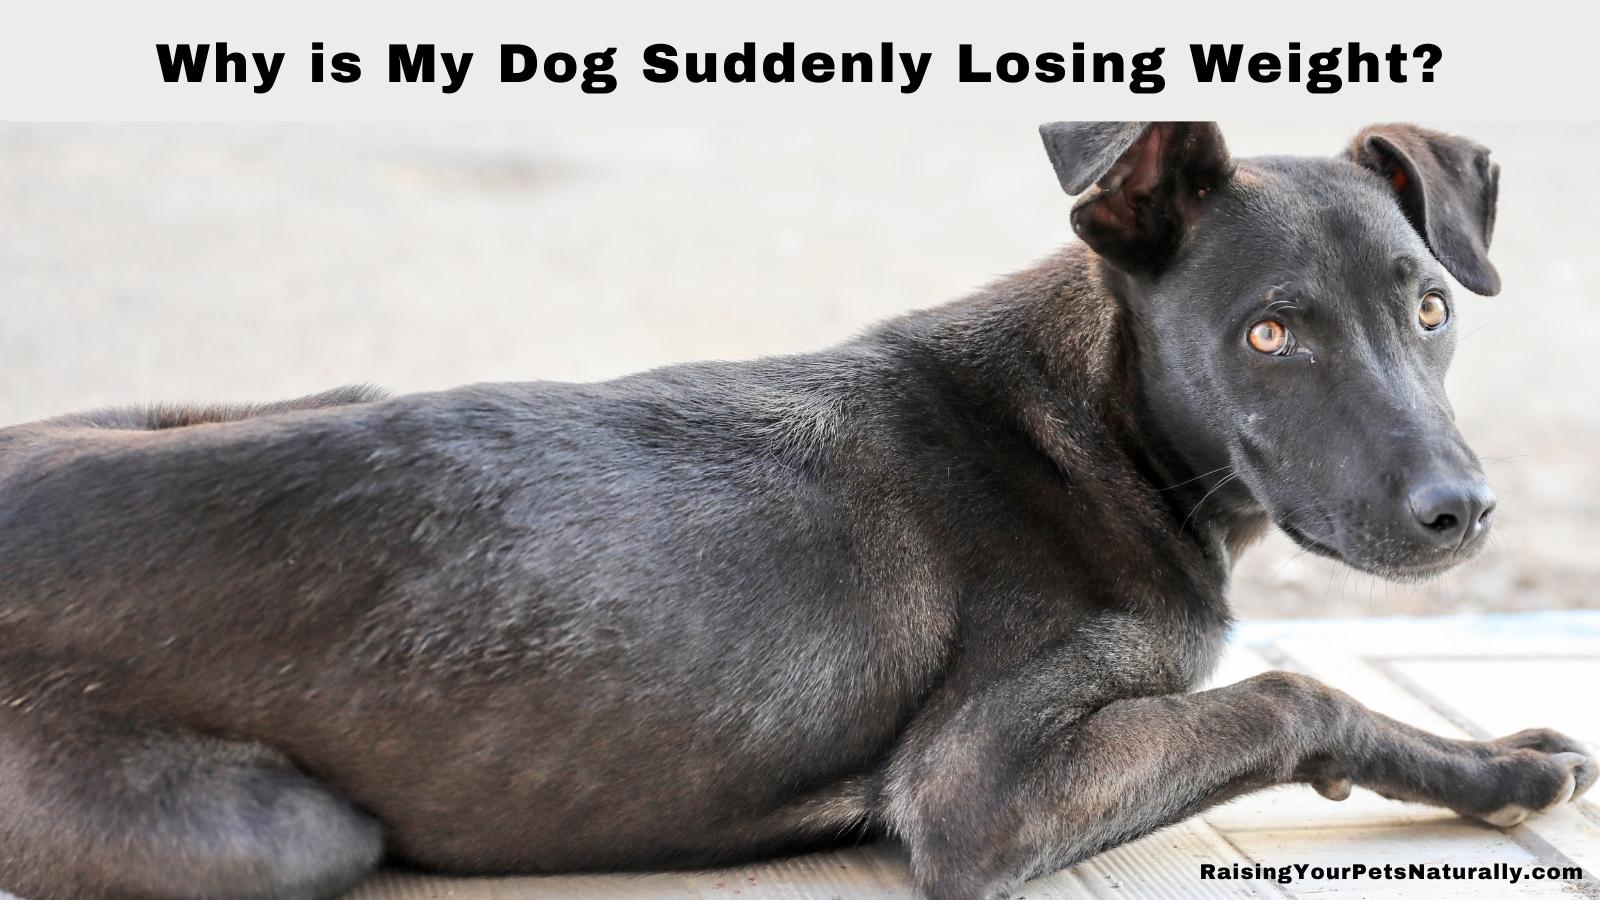 Why is my dog losing weight?